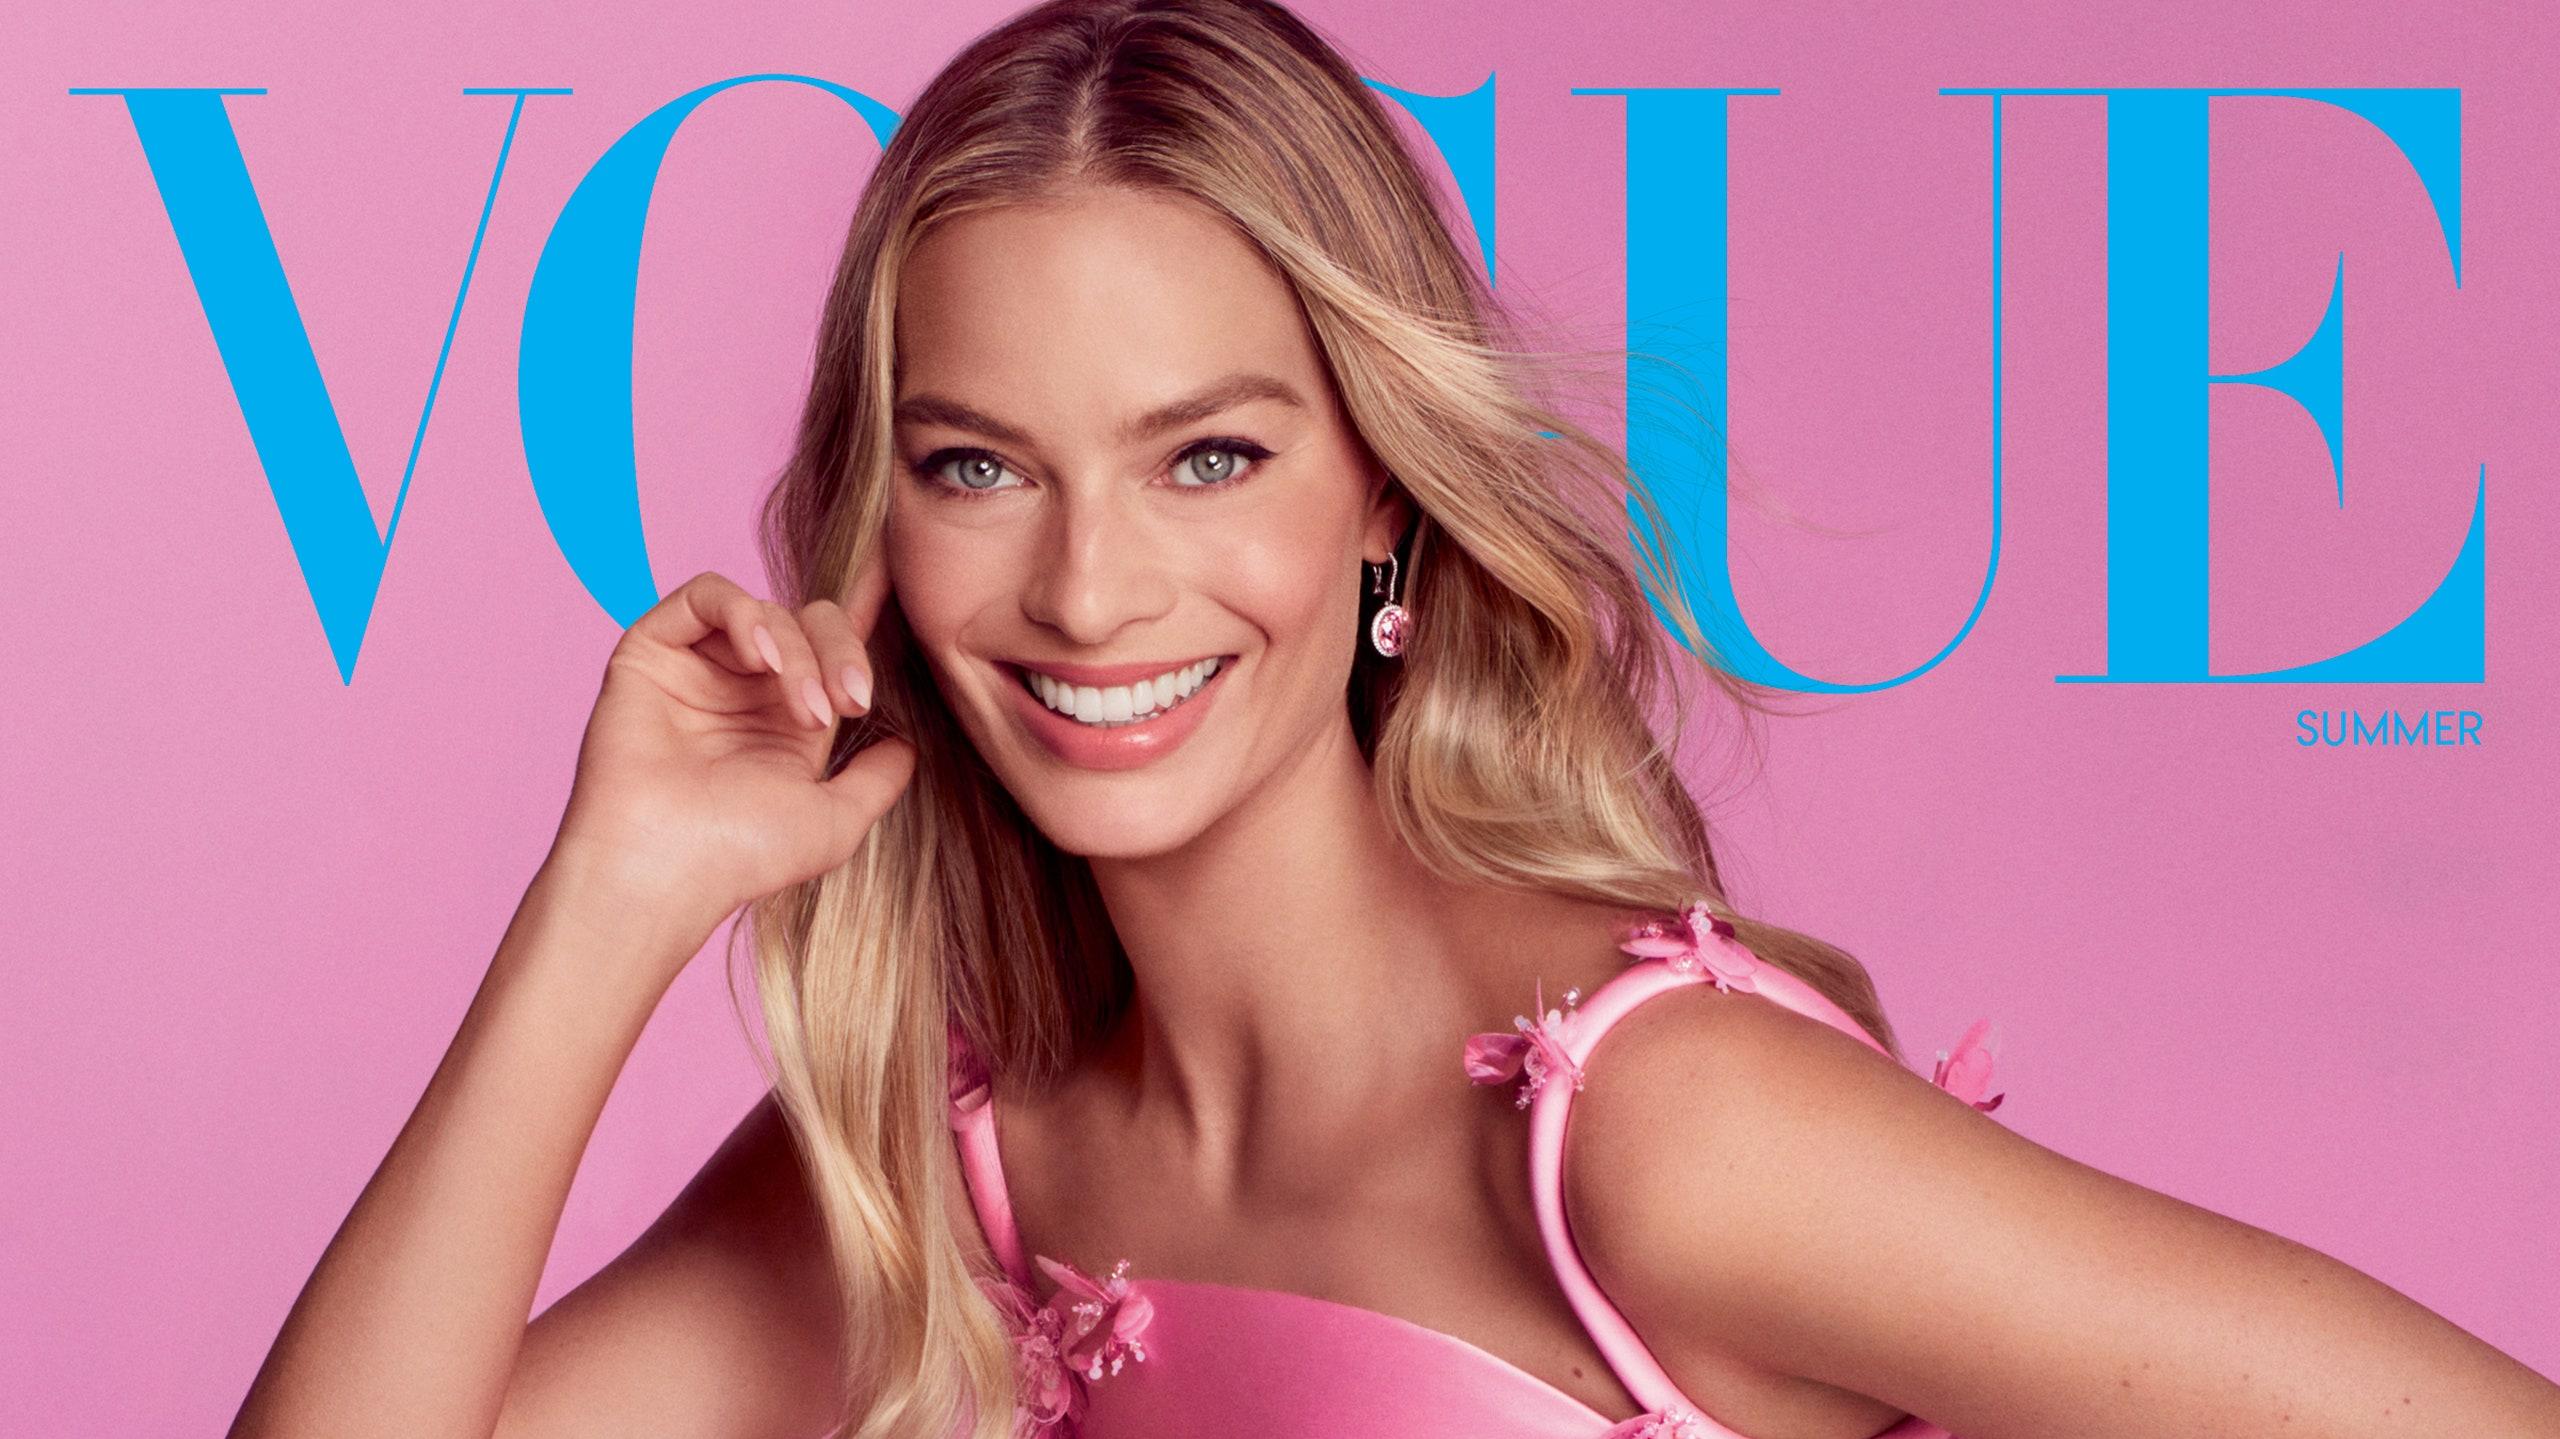 Margot Robbie Opens Up About the Barbie Movie For Vogues Summer